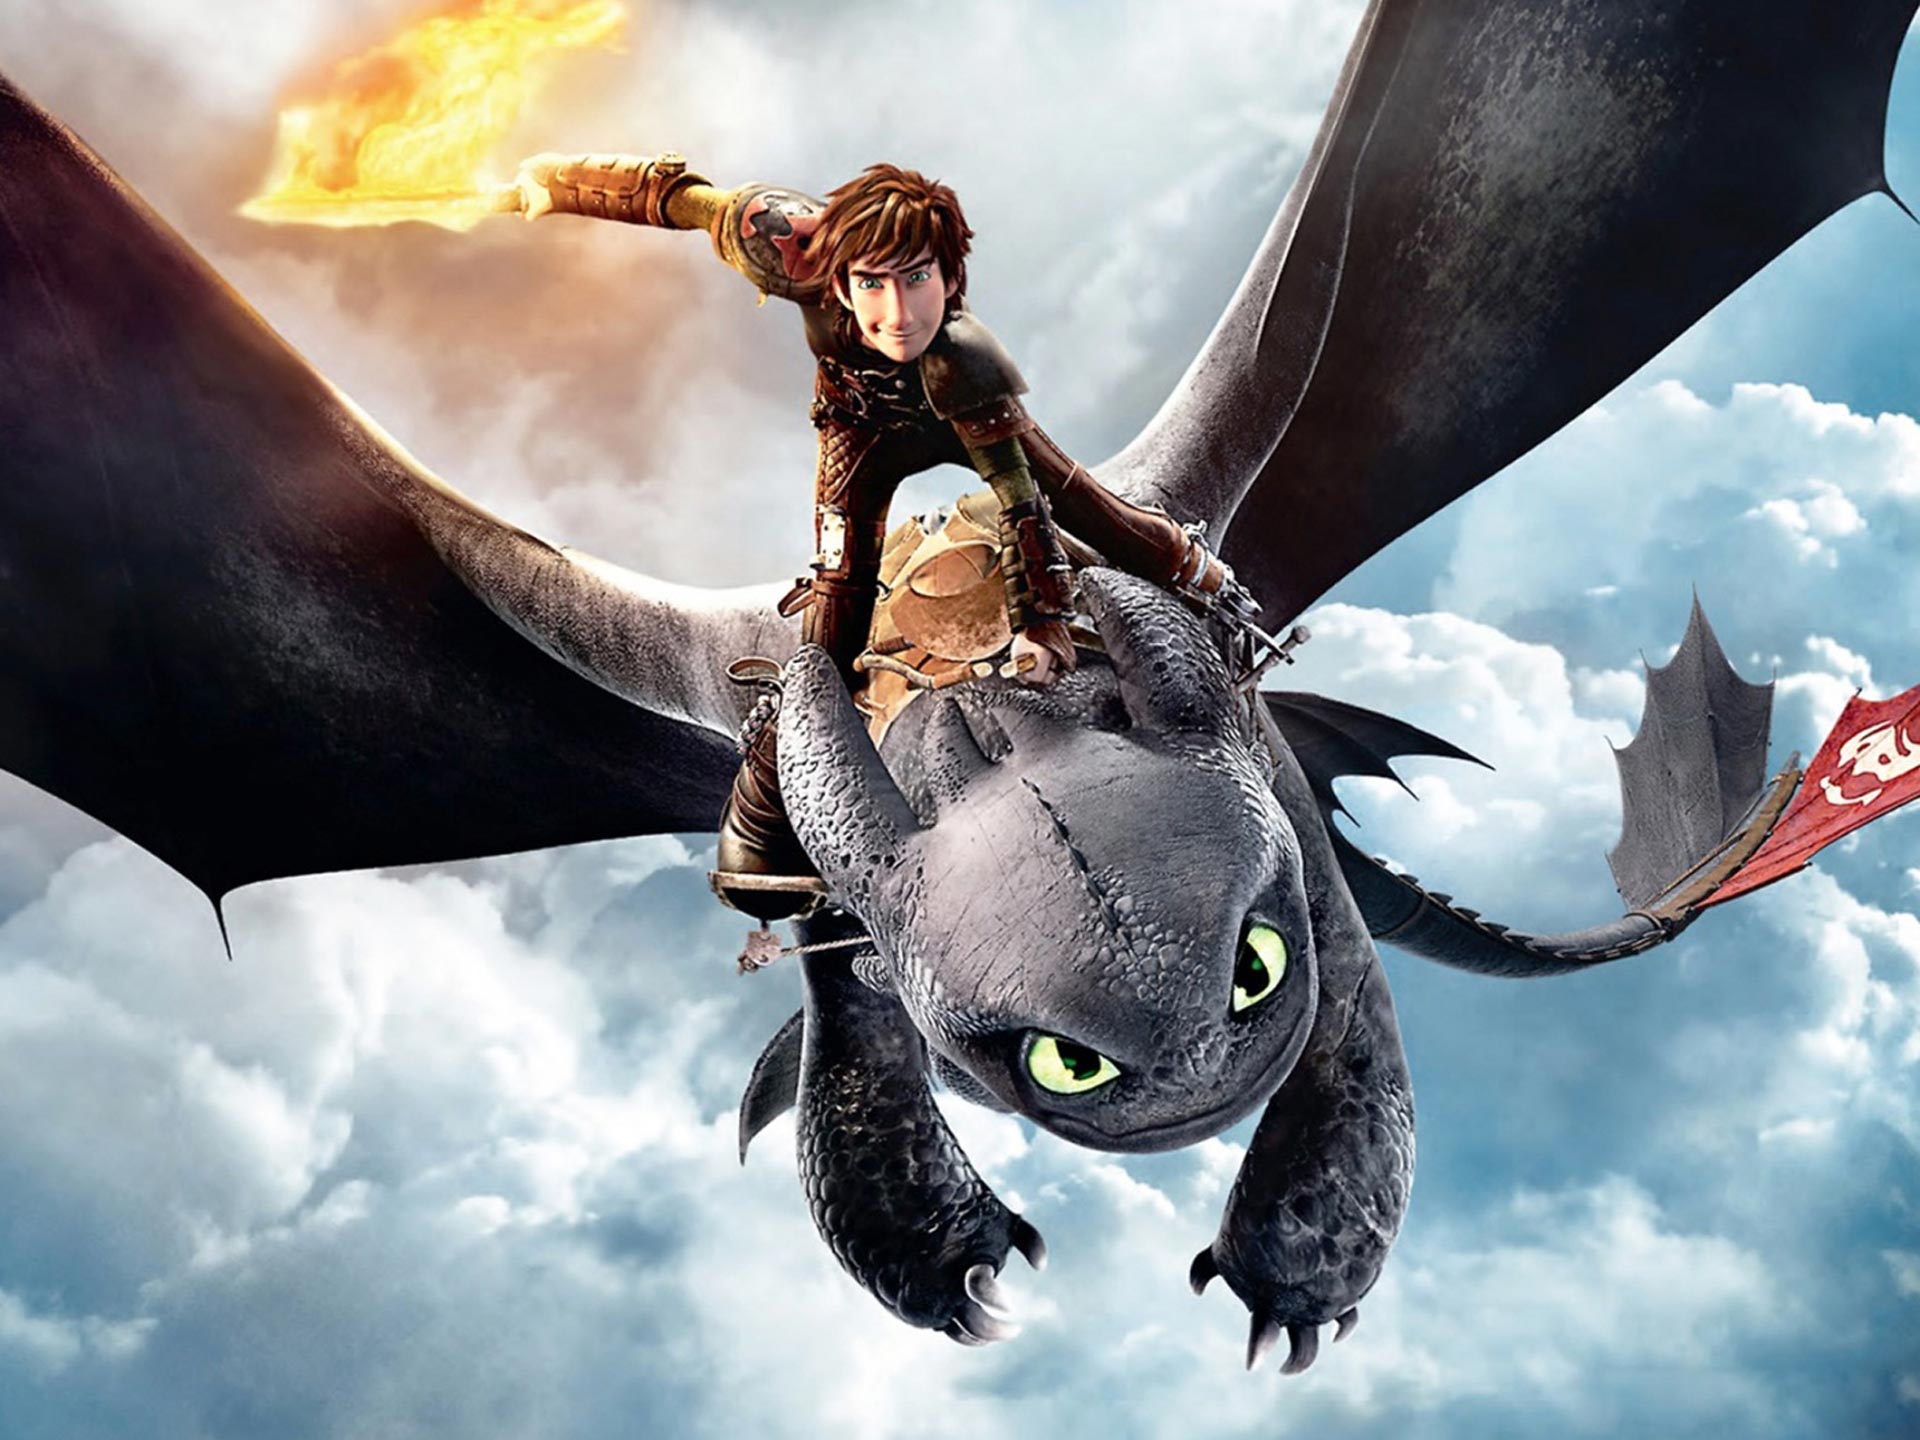 How to Train Your Dragon 2 - Hiccup riding Night Fury - 1920x1440 ...